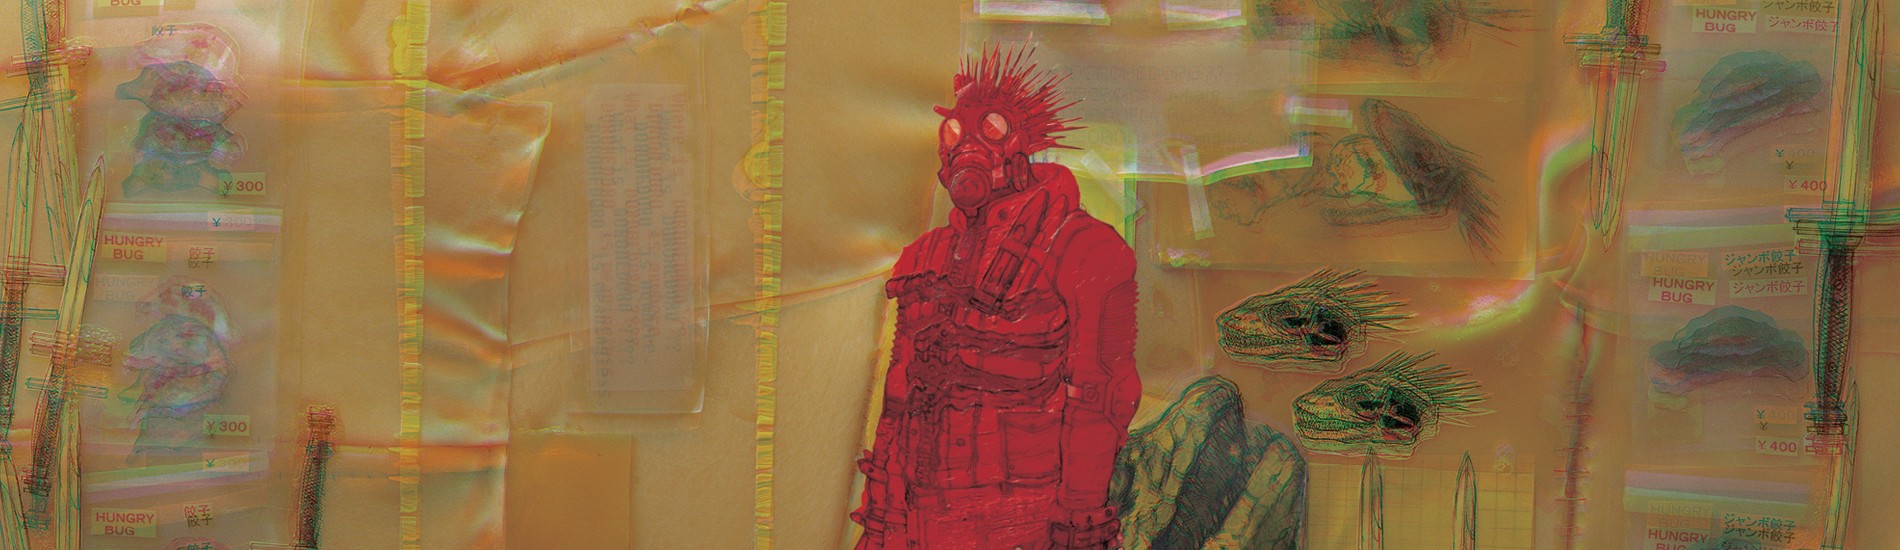 My only regret was not starting Dorohedoro reading the manga. The